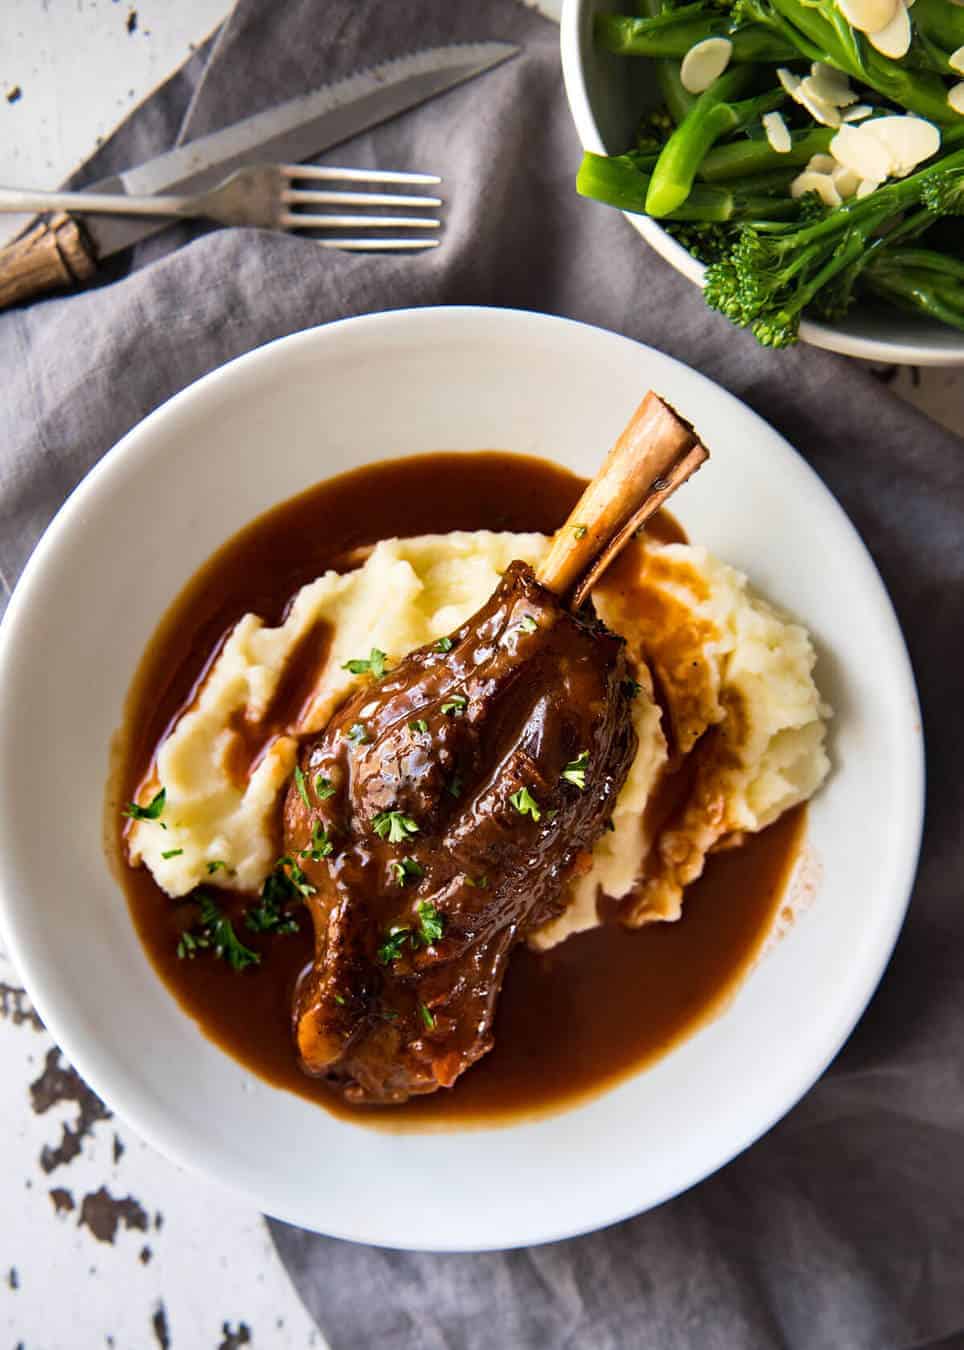 Slow Braised Lamb Shanks Simply Delicious